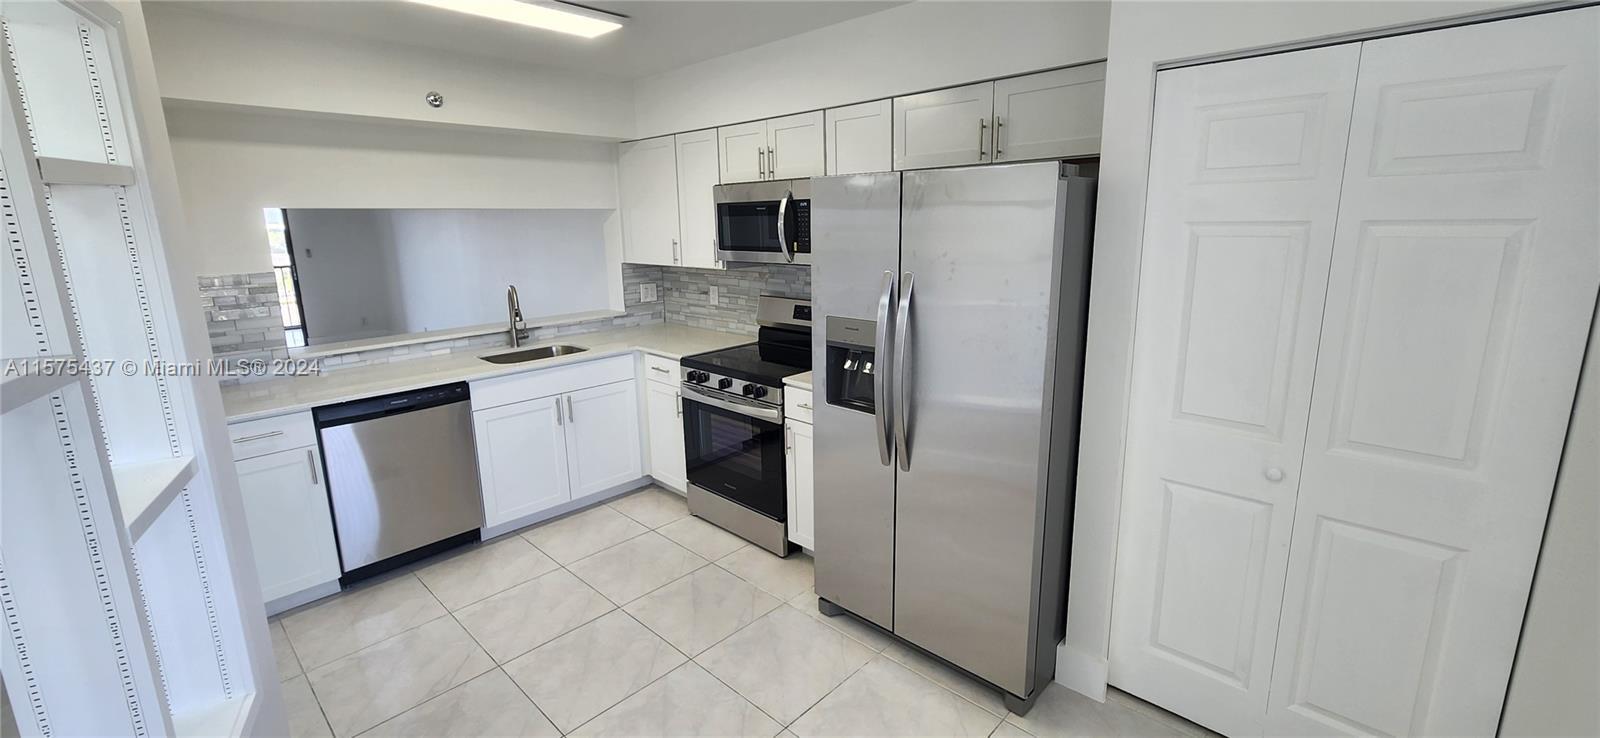 L@@k IS VACANT. Immaculate fully remodeled 2/2 Condo in Pompano Beach. Beautiful cabinets, Quartz co